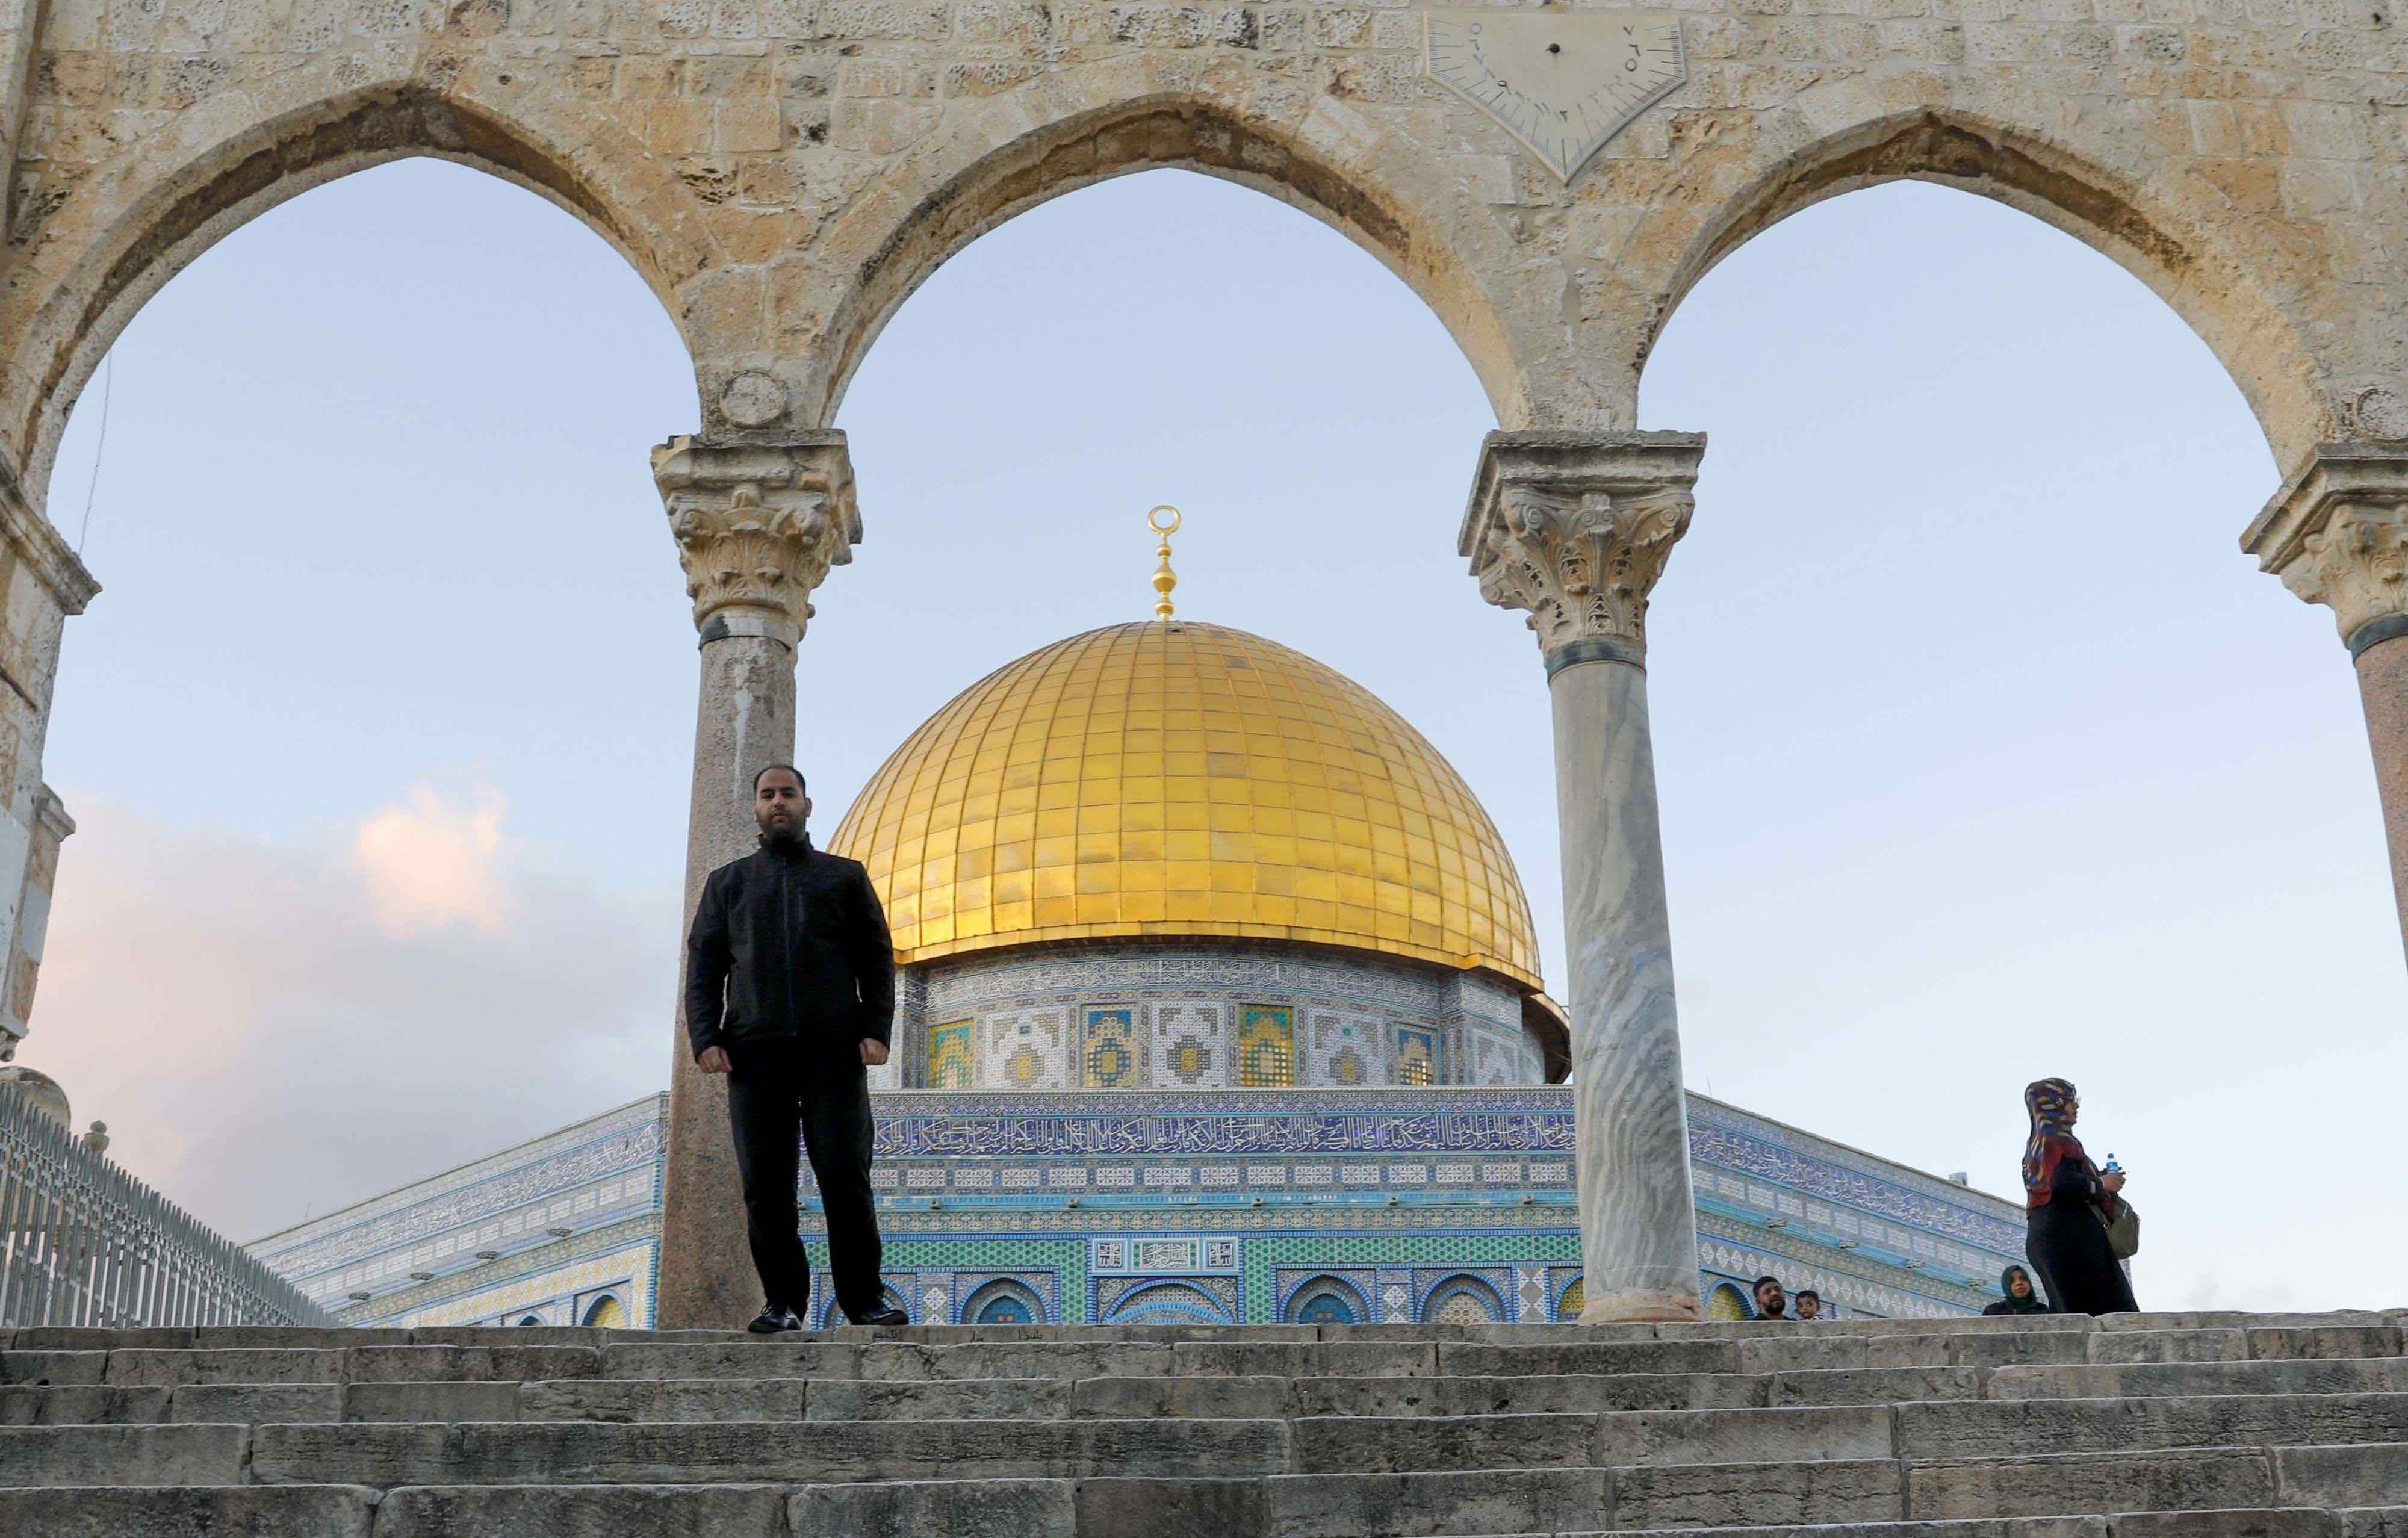 "It is an honour from God that this family has been blessed with beautiful voices to be able to call the prayer in the Al-Aqsa mosque," he said